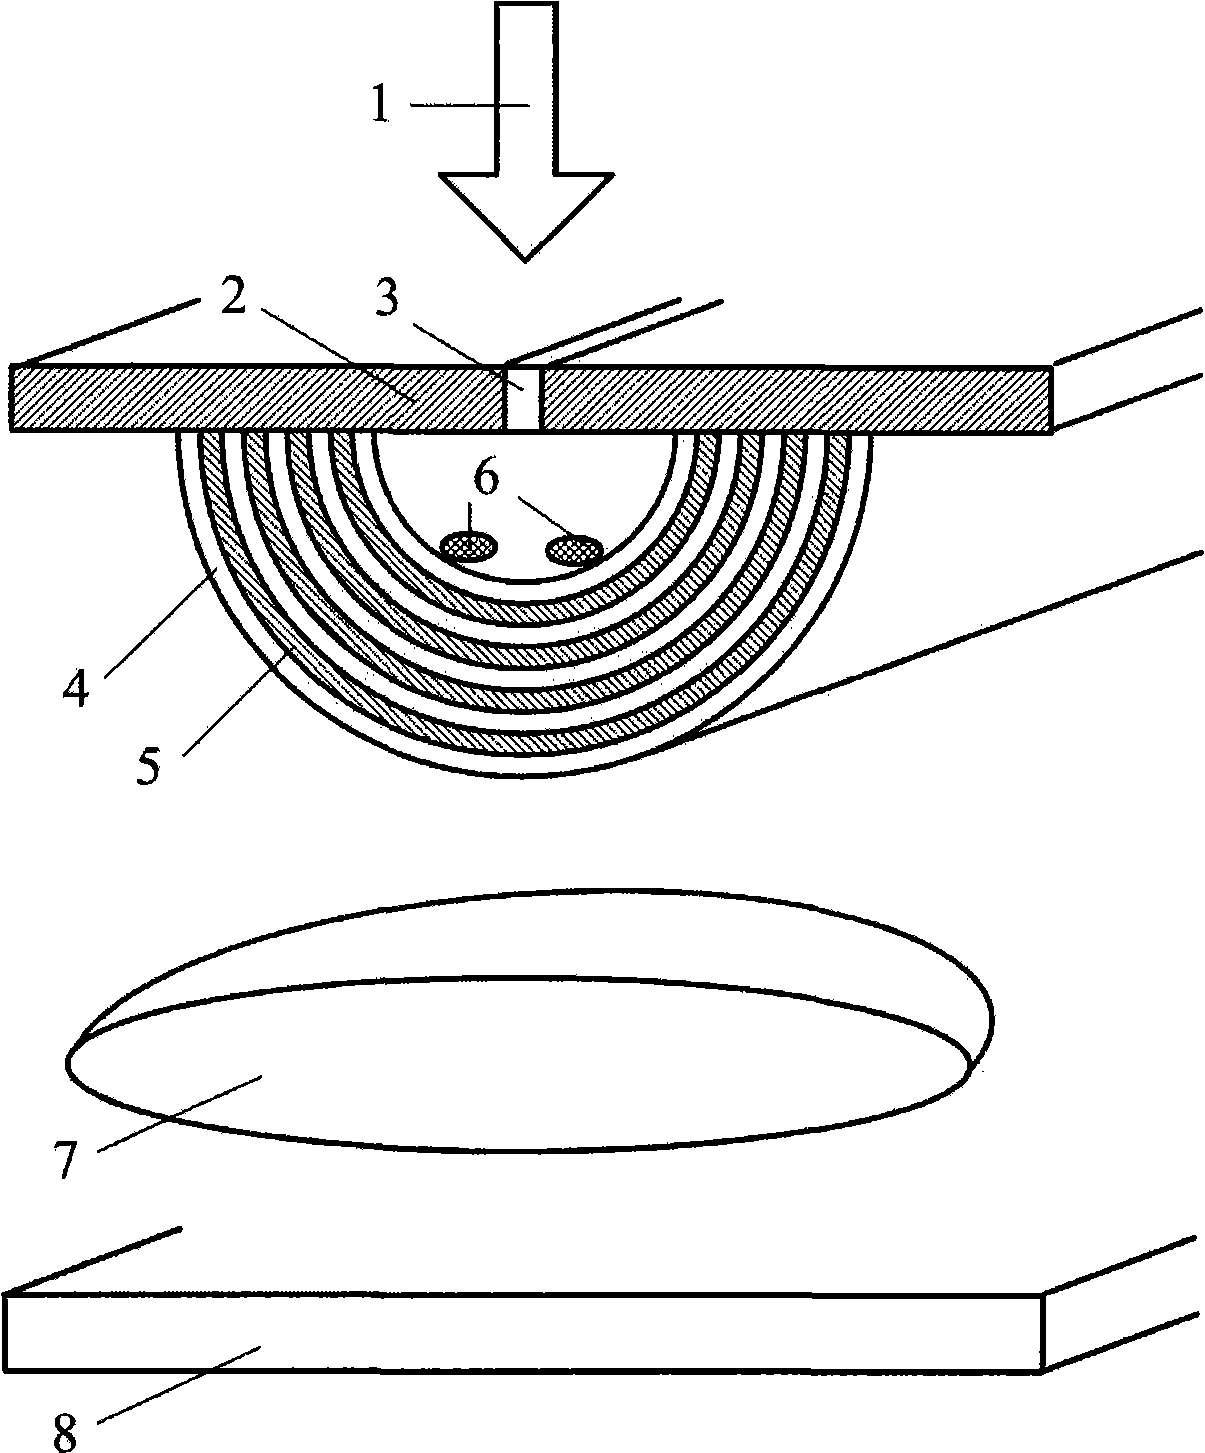 Curved surface composite super resolution current-carrying tube